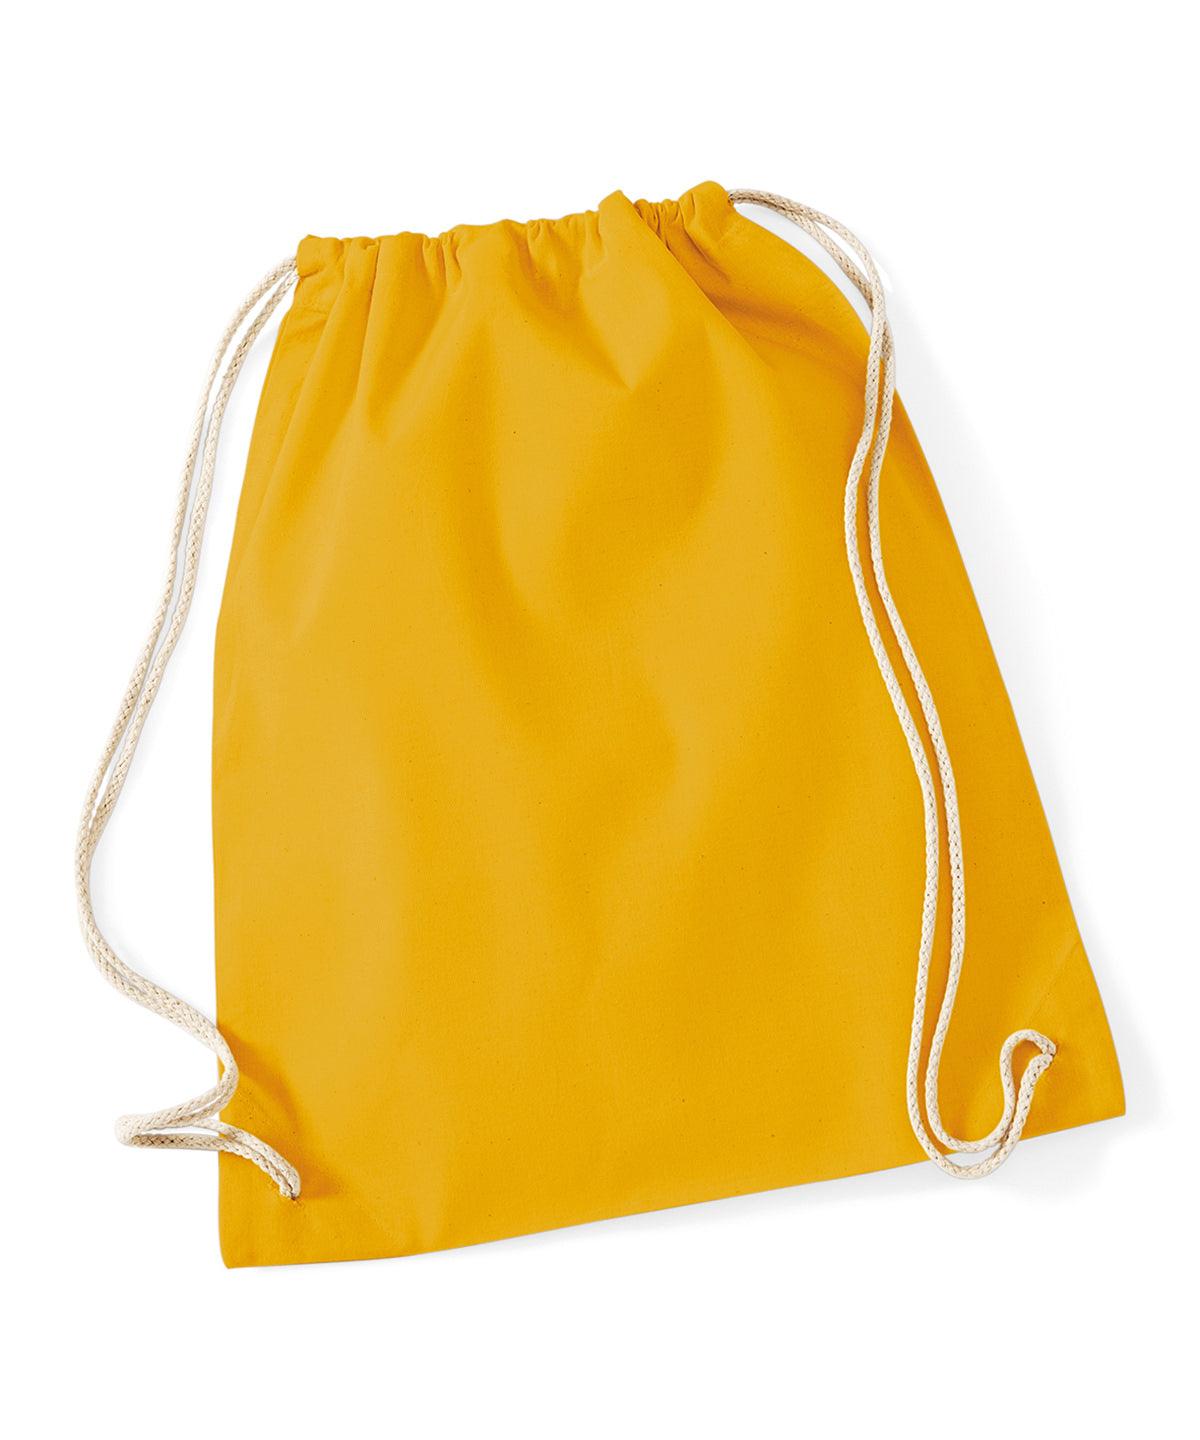 Mustard - Cotton gymsac Bags Westford Mill Bags & Luggage, Junior, Must Haves, Pastels and Tie Dye Schoolwear Centres